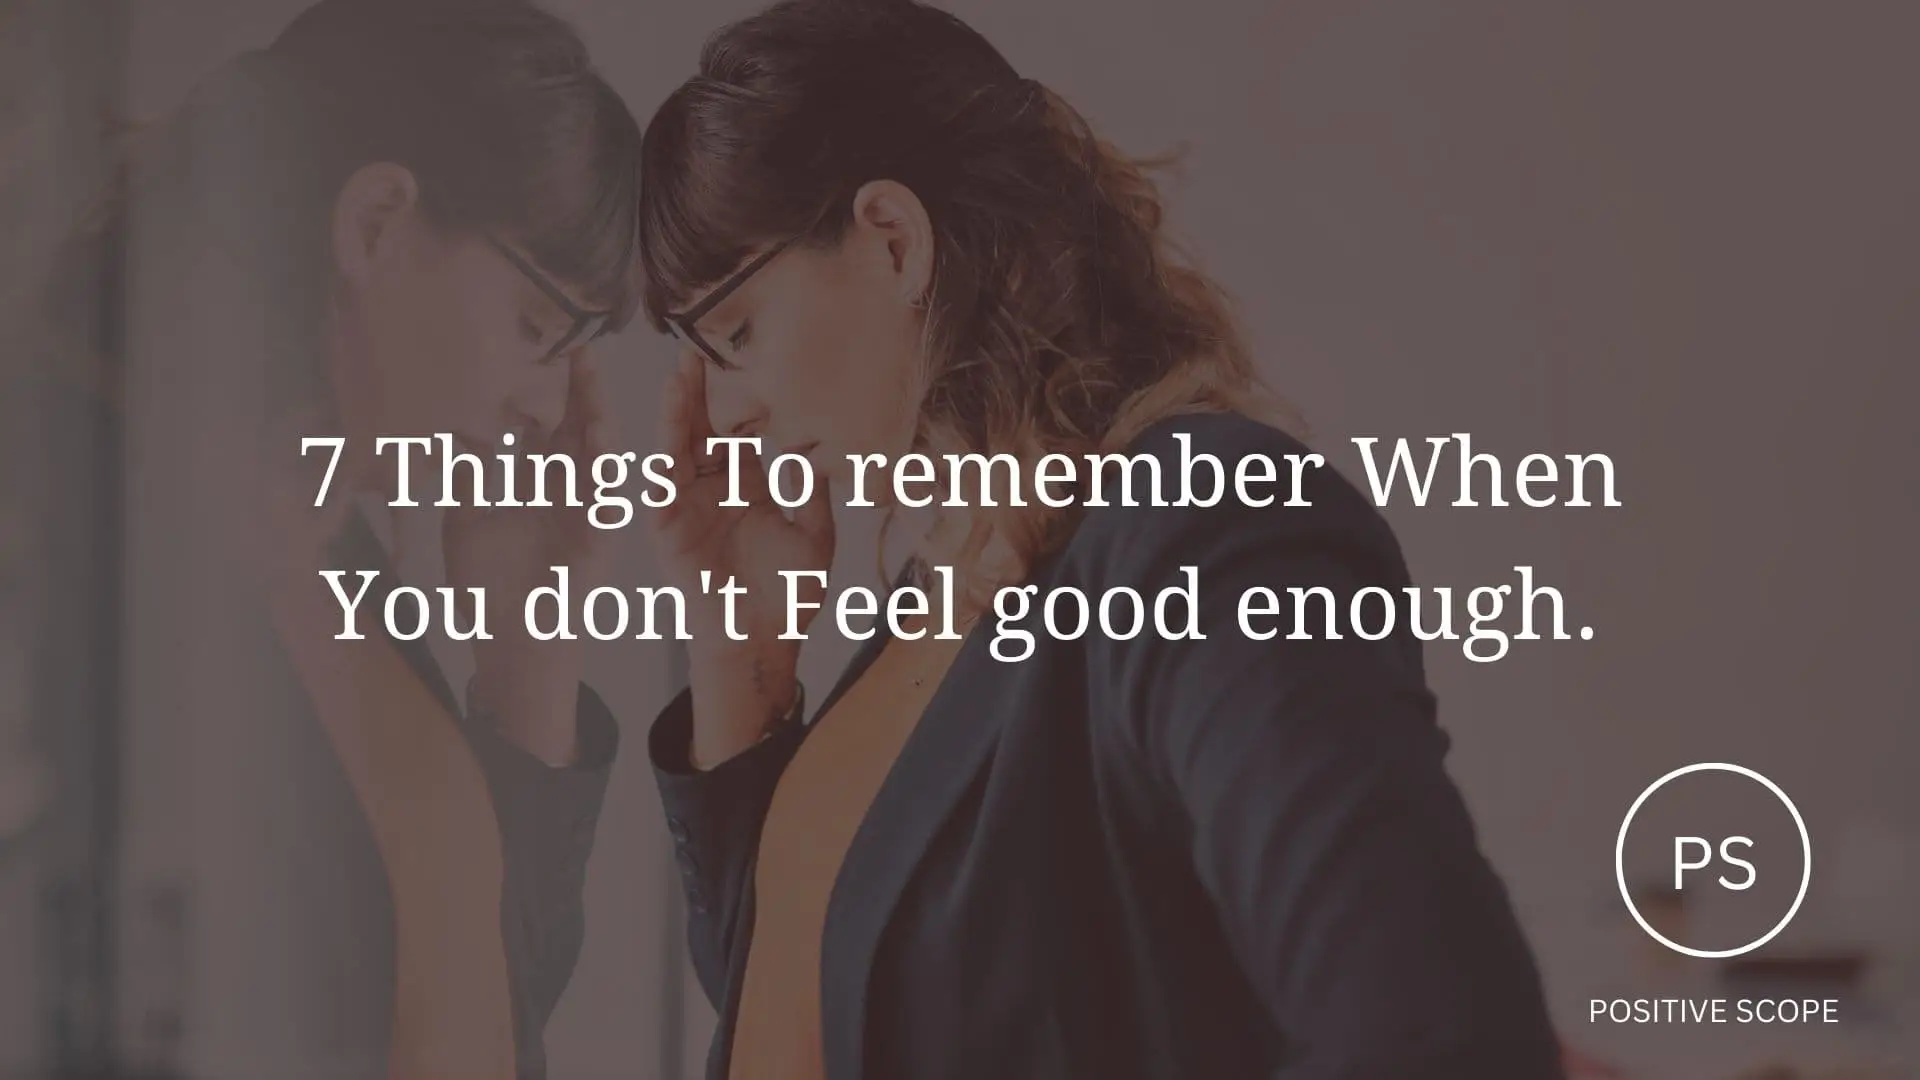 7 Things To remember When You don’t Feel good enough.